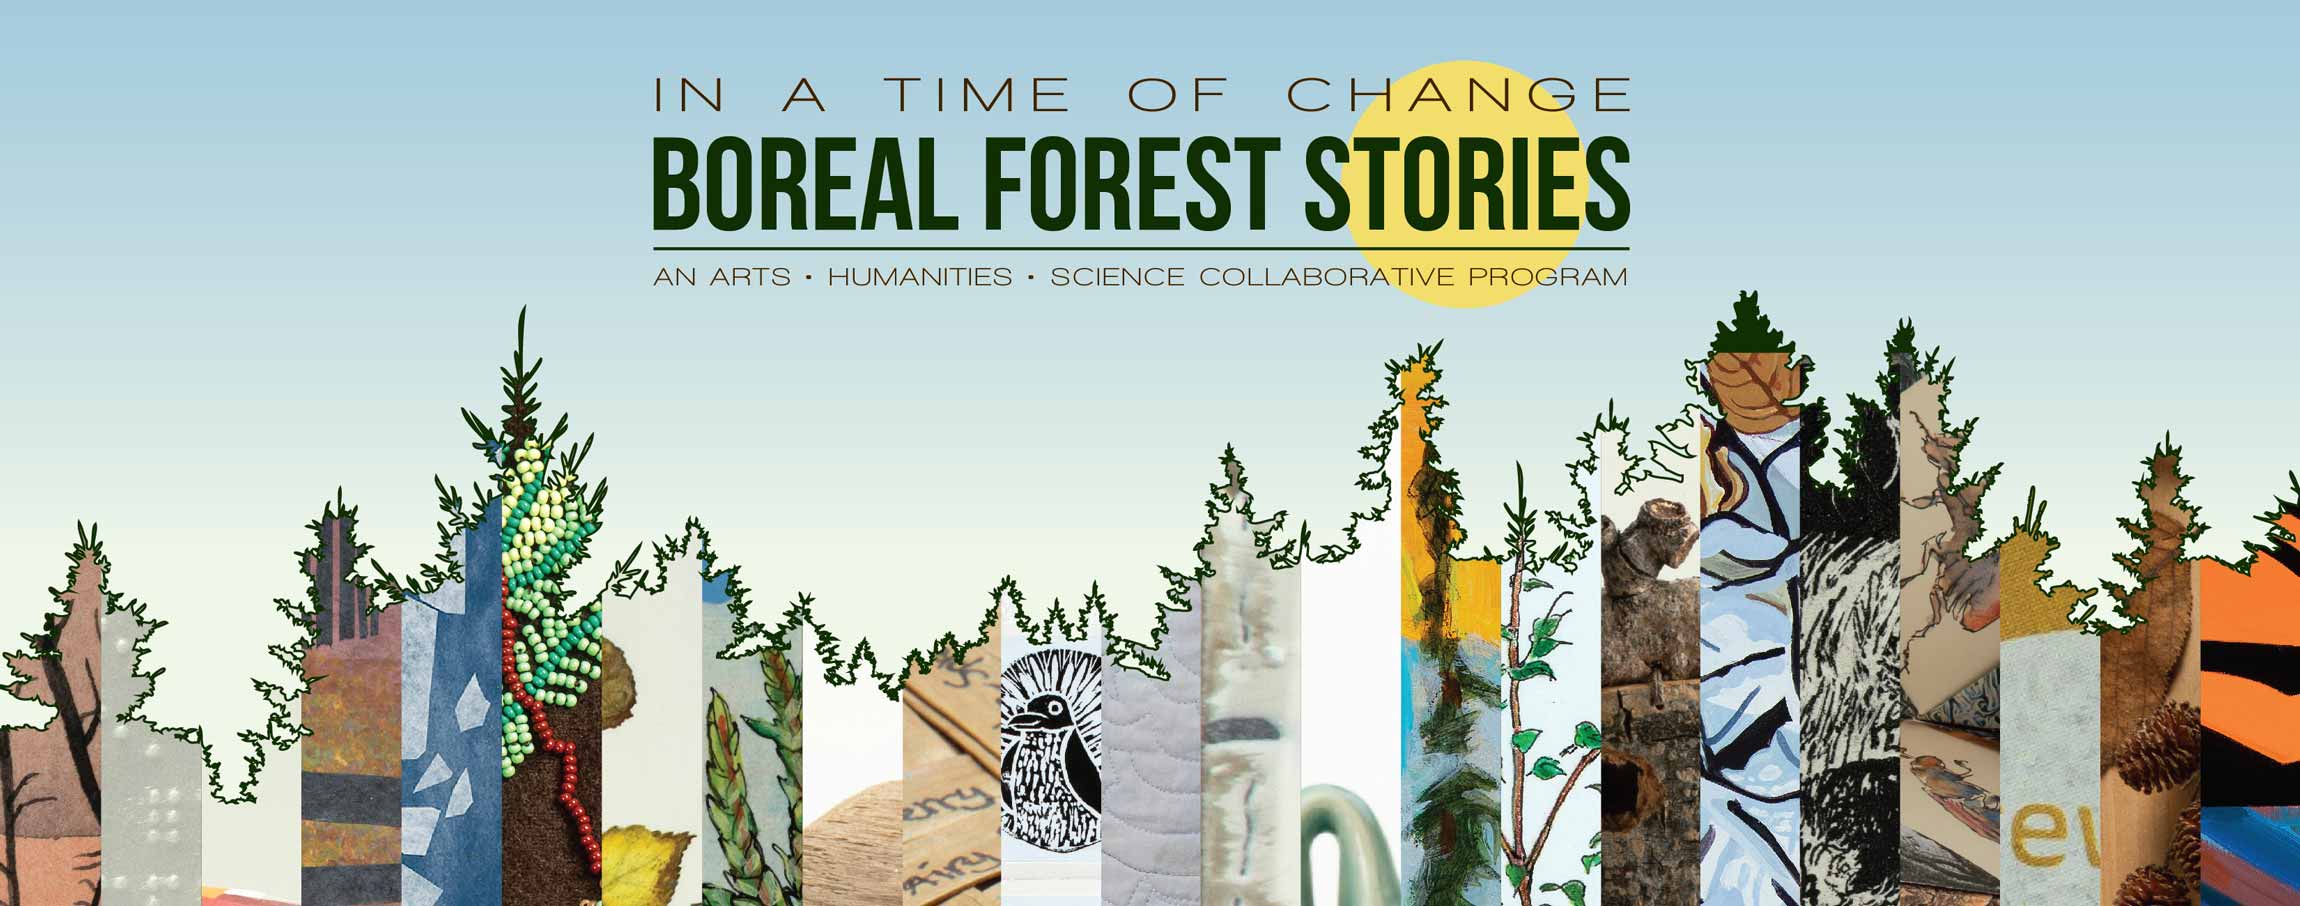 Banner showing an outline of trees with slices of artwork and the text Boreal Forest Stories an arts humanities science collaborative program